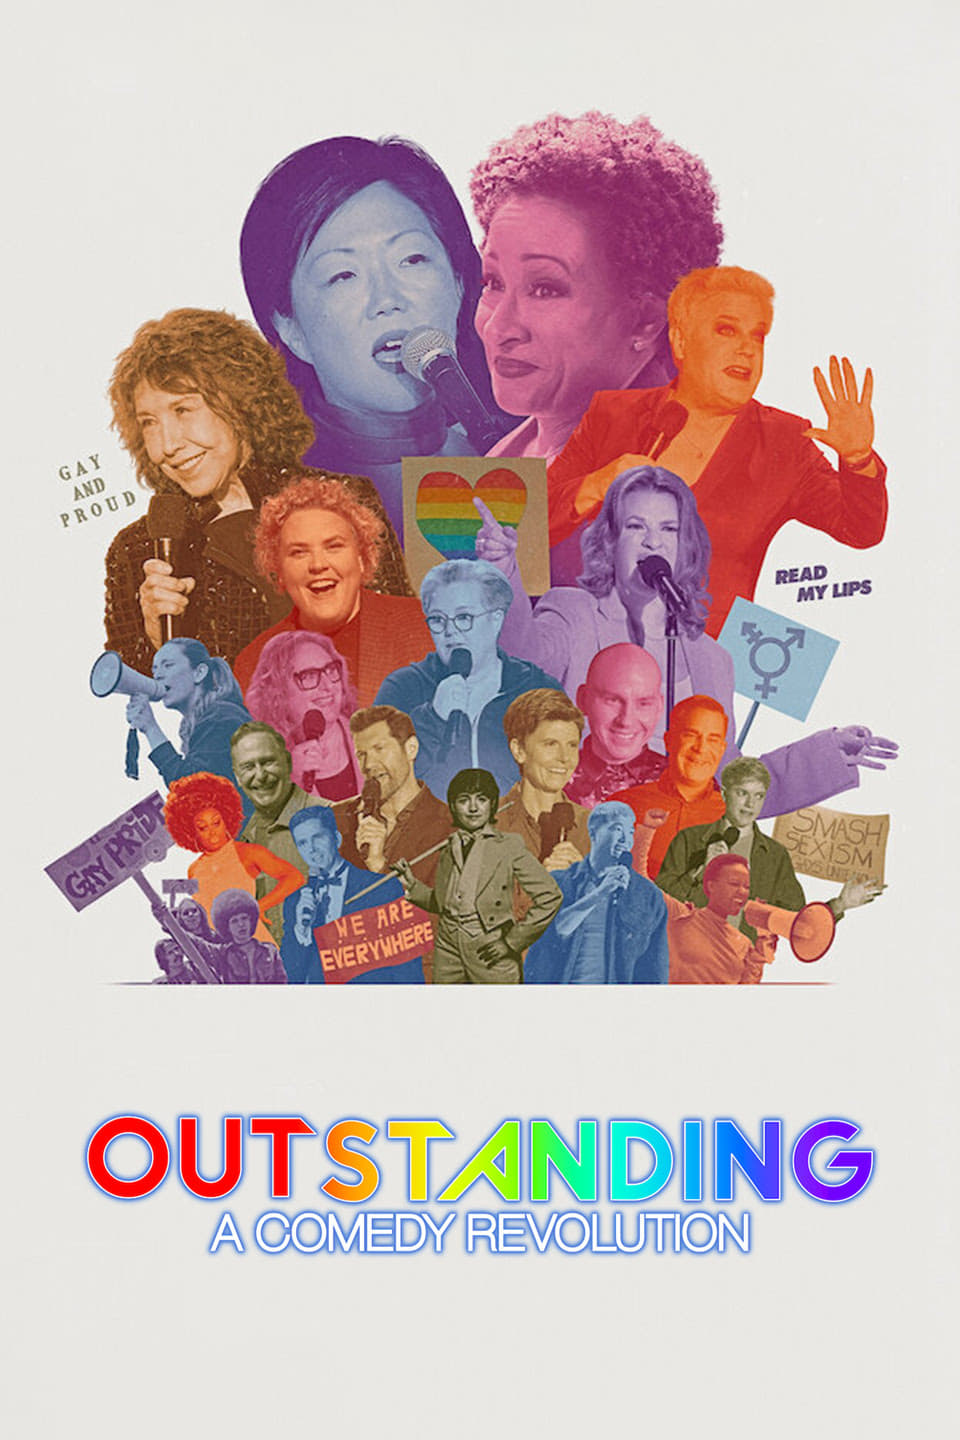 Outstanding: A Comedy Revolution Full Movie